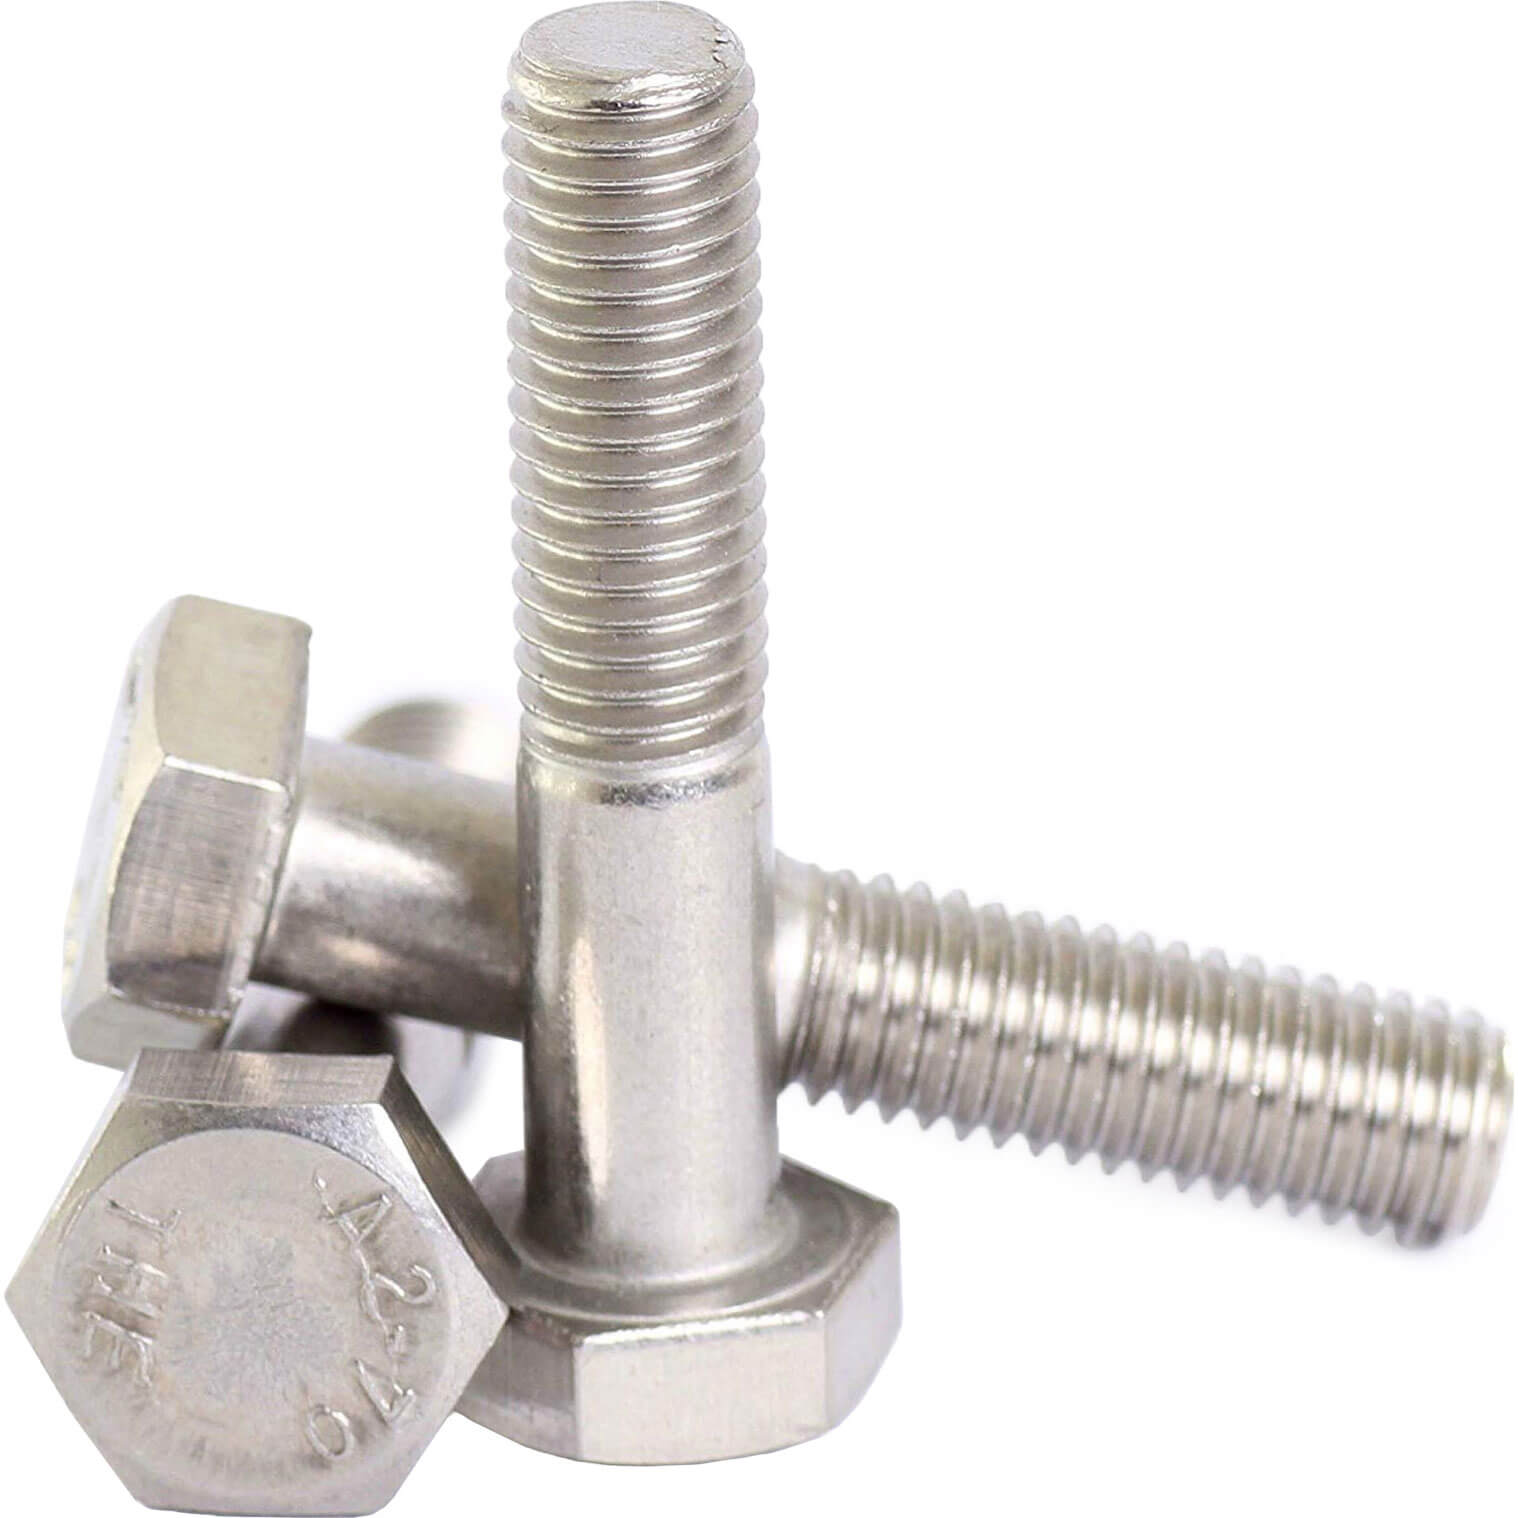 Image of Sirius Bolts A2 304 Stainless Steel M12 50mm Pack of 1